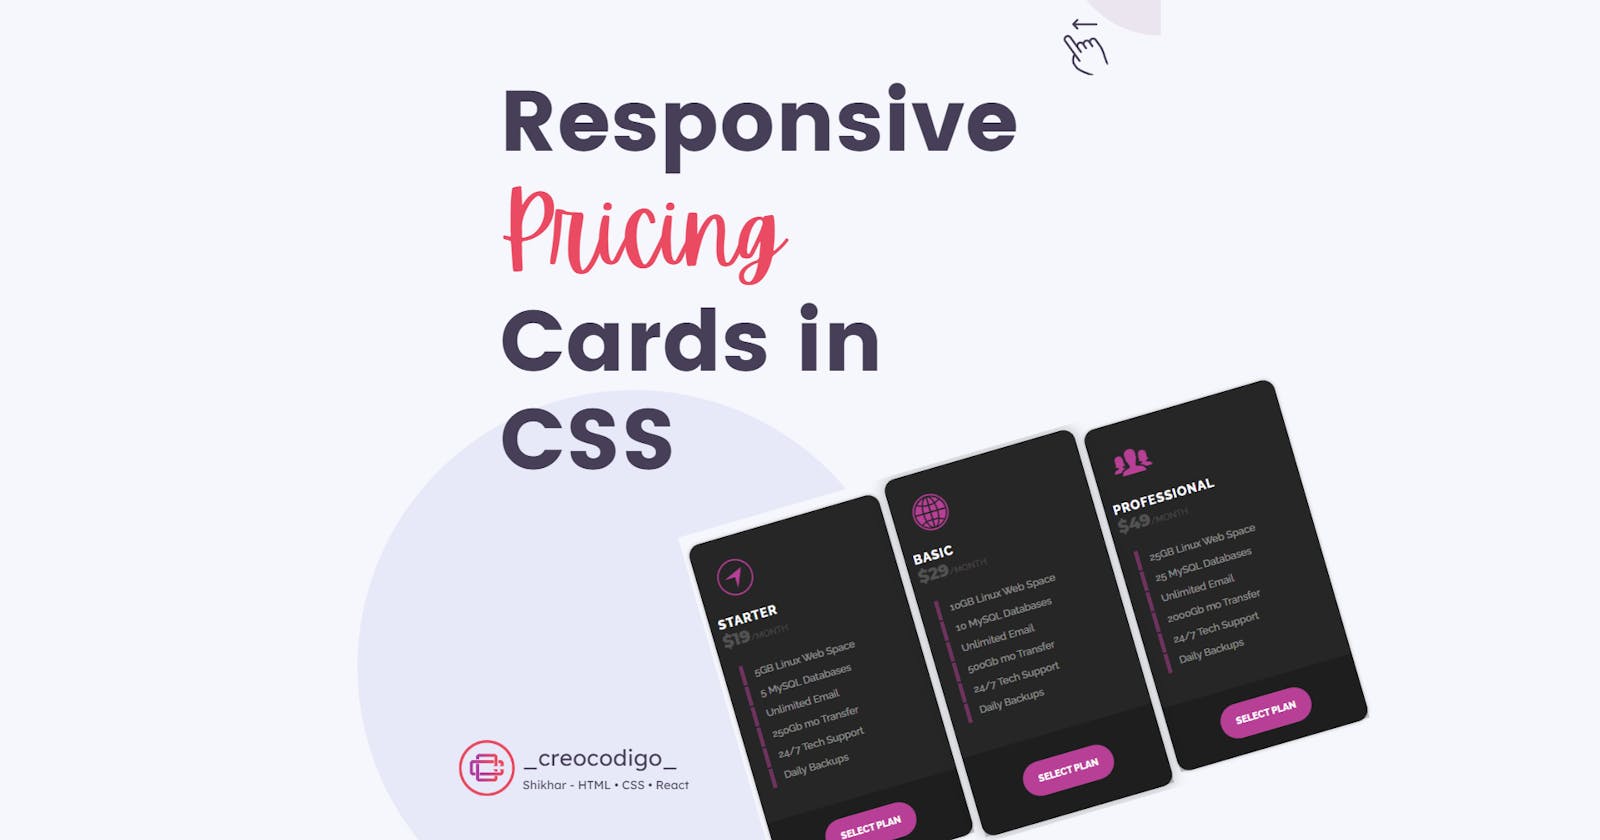 Responsive Pricing Cards in CSS